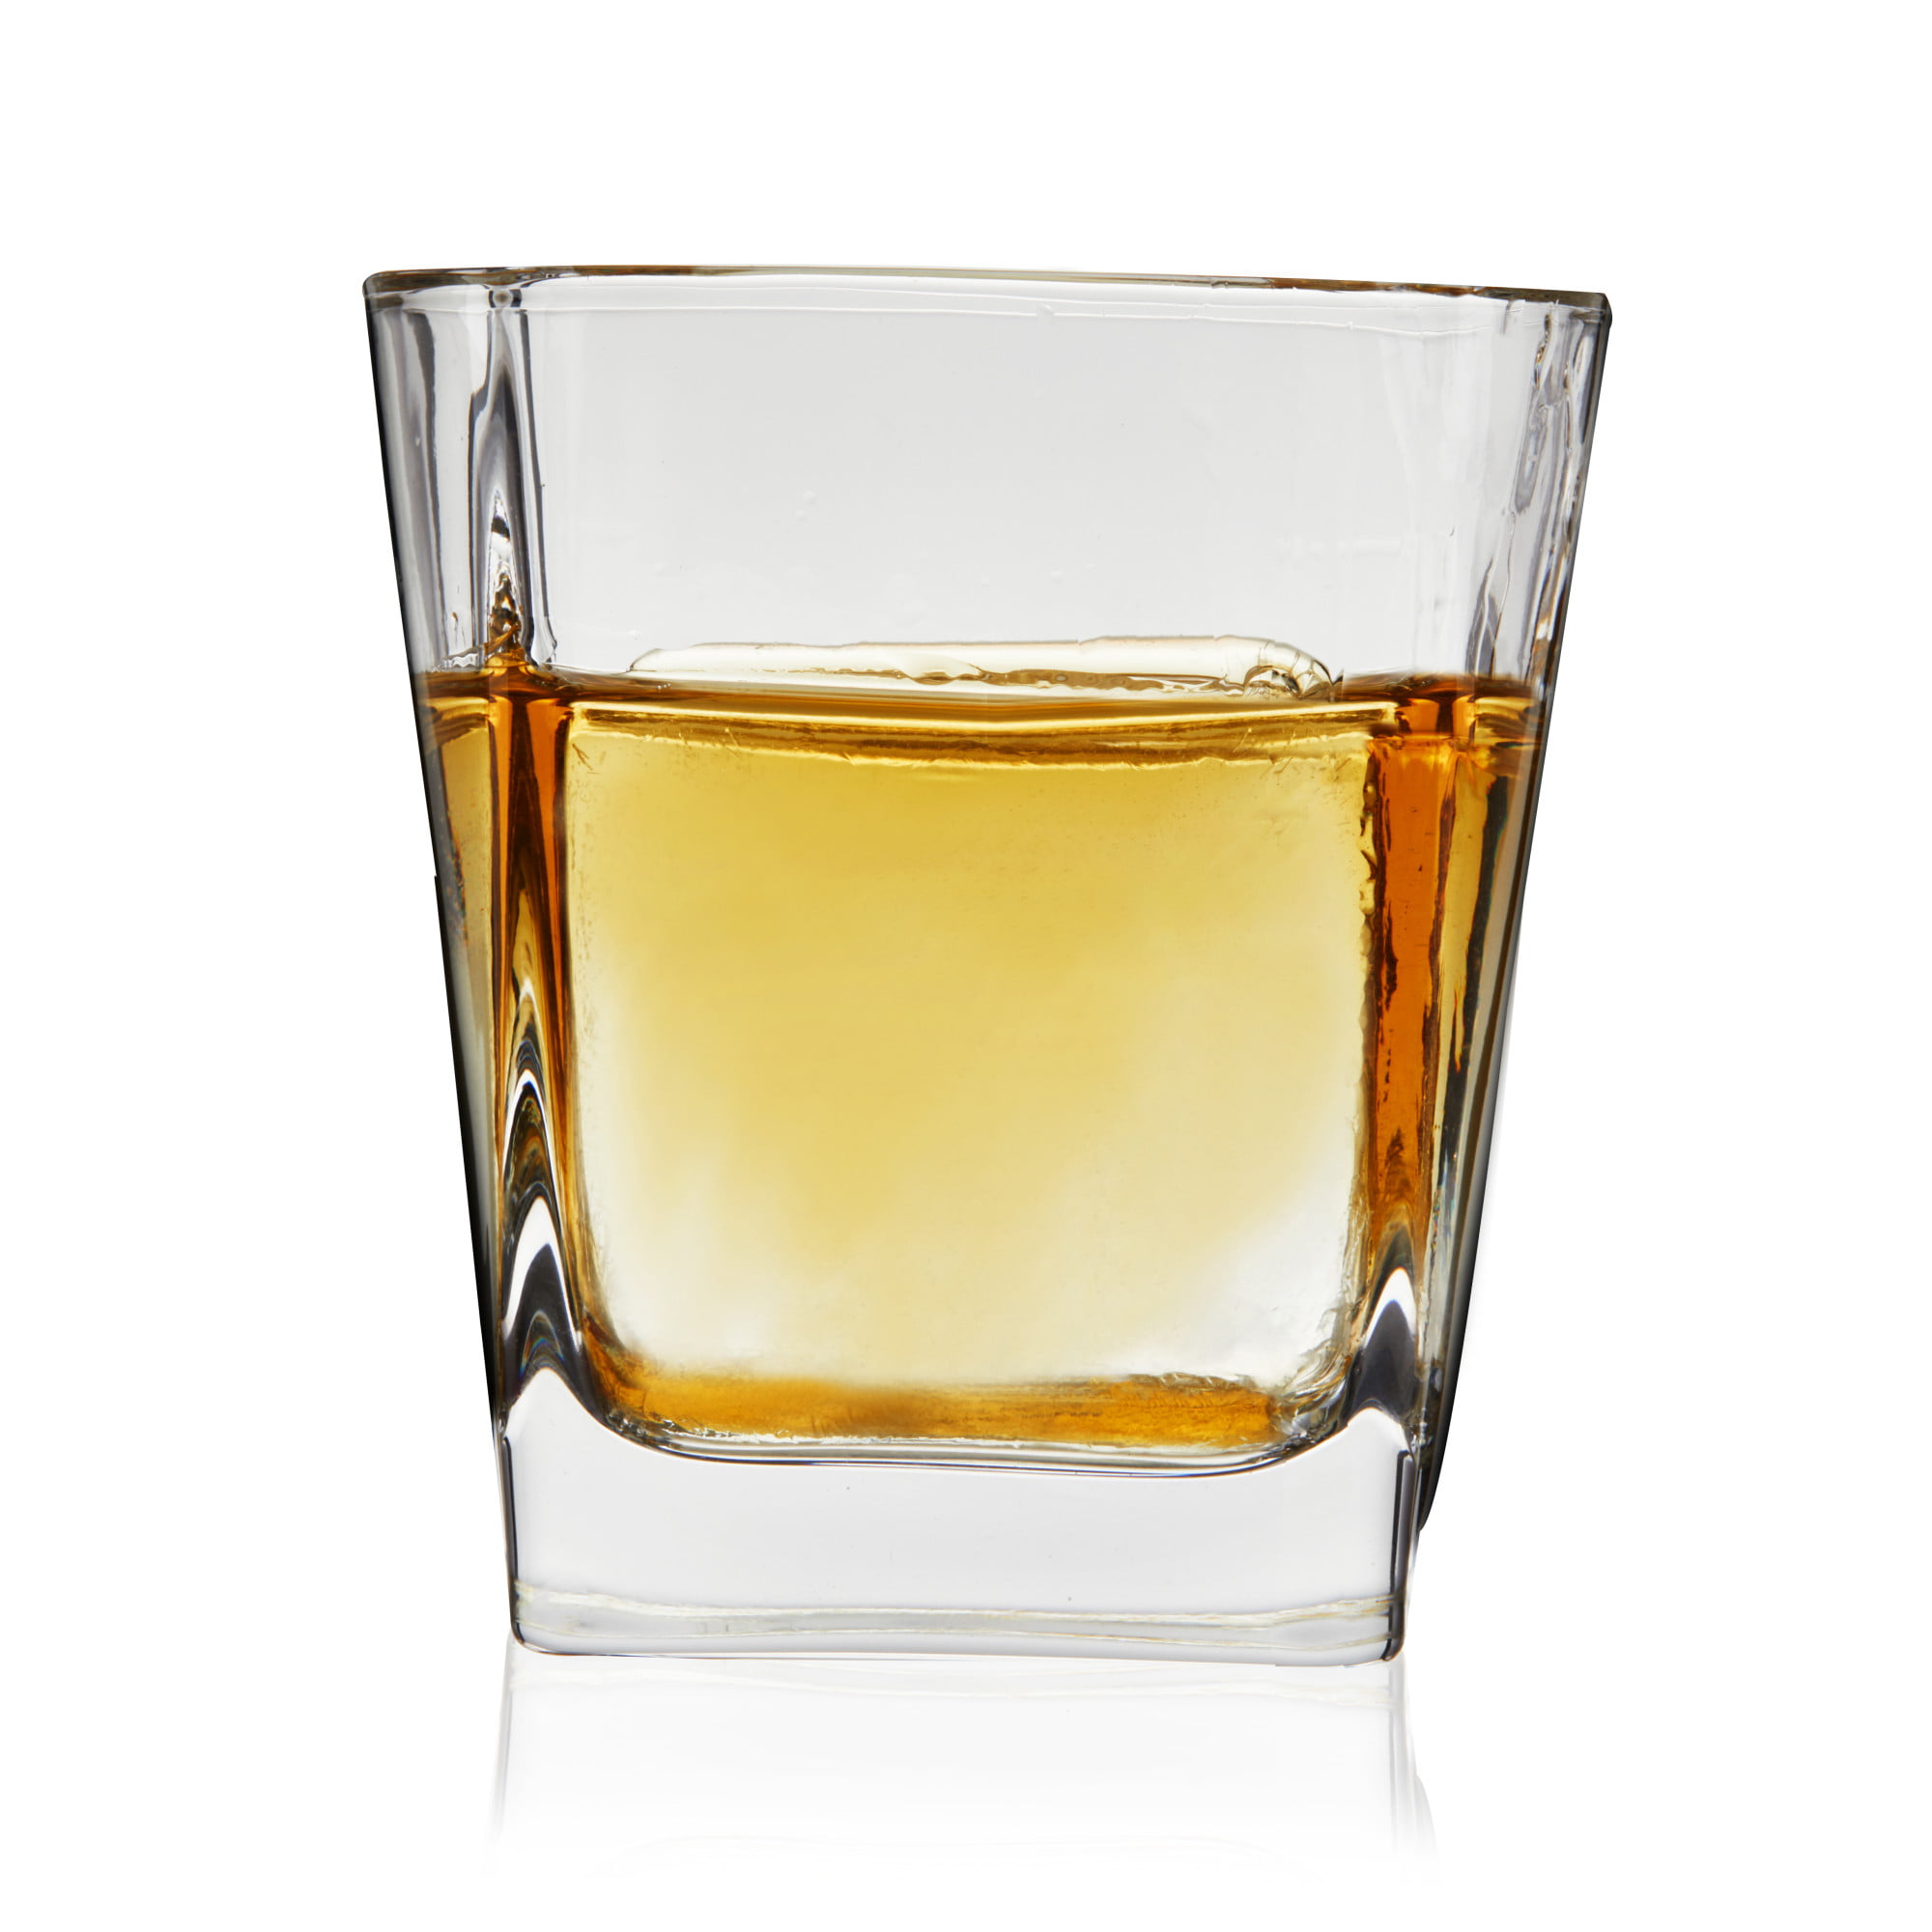 Alchemade Set of 2 Whiskey Glasses with Metallic Design - 16 oz Lowball for Cocktails, Old Fashioned, Manhattan, Bourbon, or Scotch - Stemless Wine